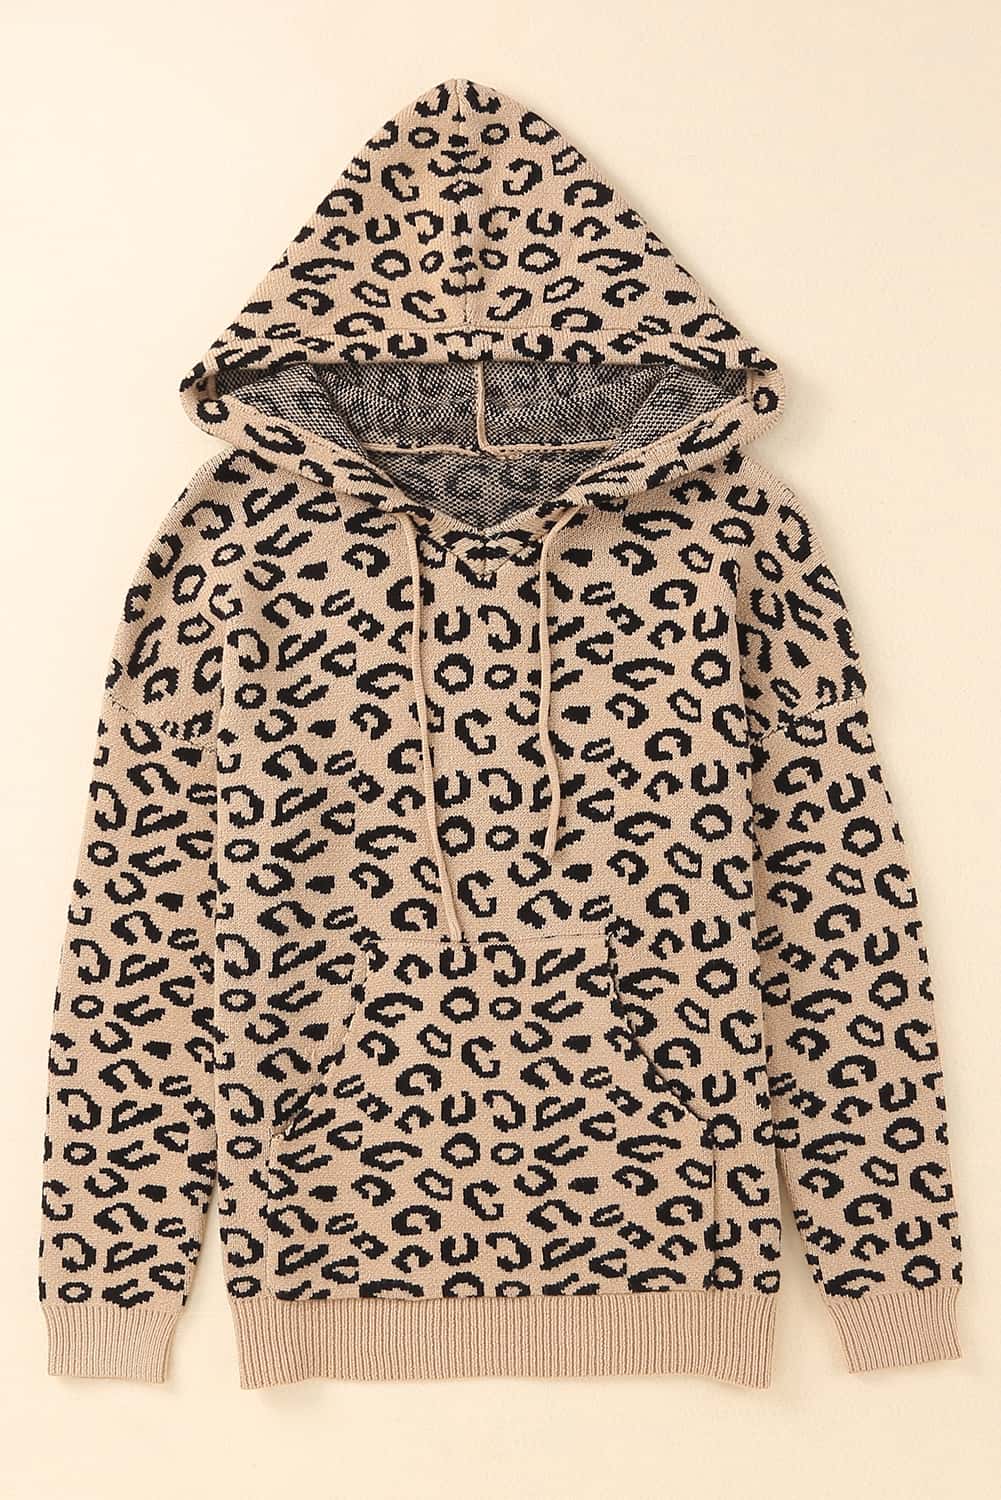 Leopard Print Drawstring Hooded Sweater BLUE ZONE PLANET